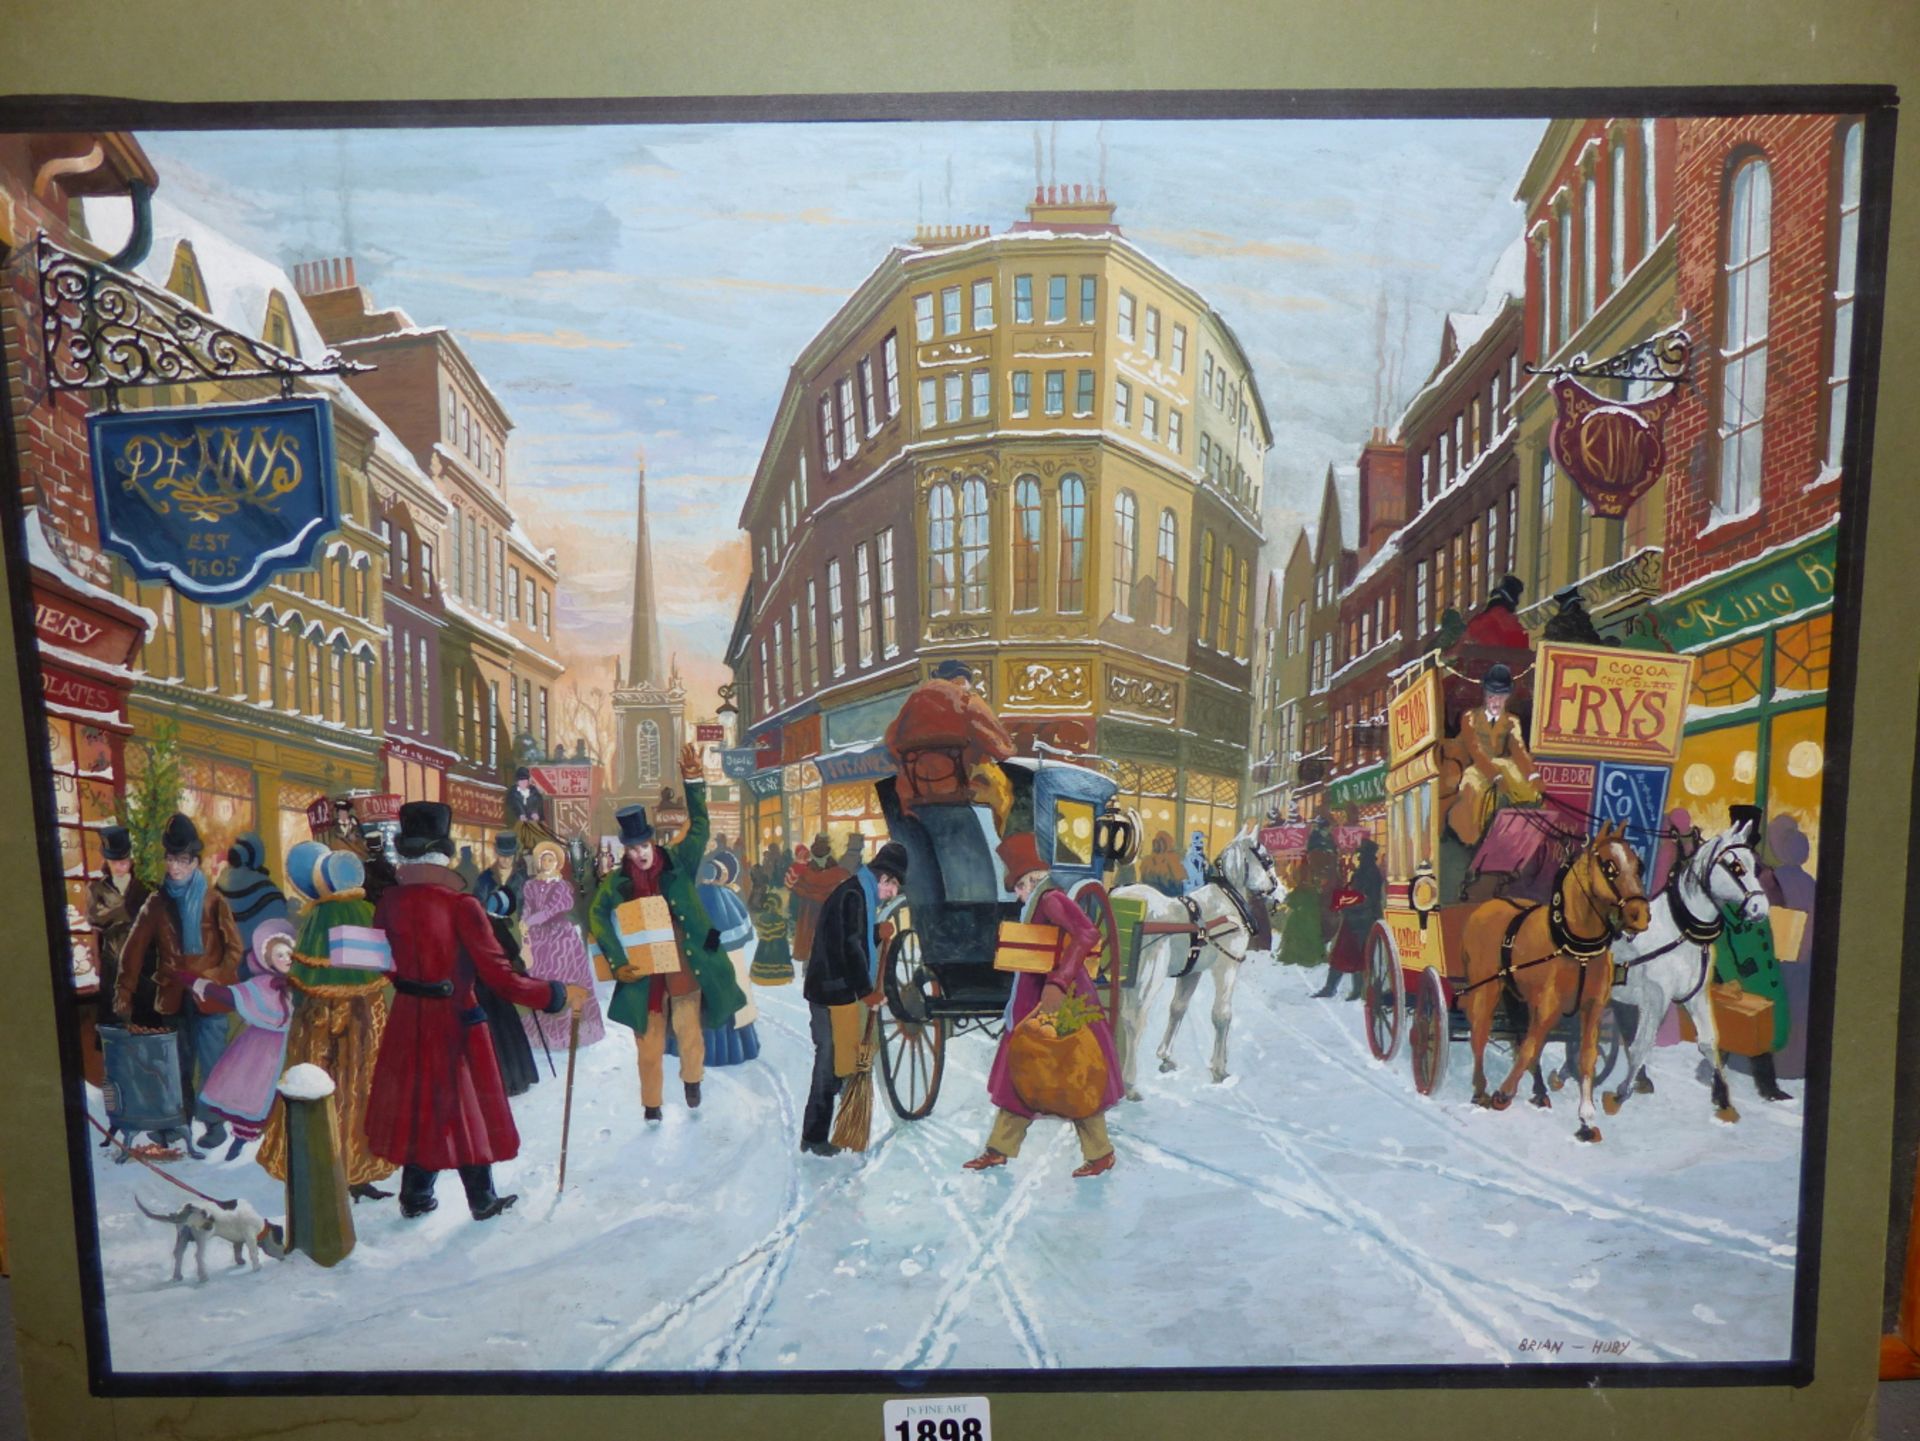 BRIAN HUBY (20TH CENTURY) ARR, A VICTORIAN STREET SCENE WITH FIGURES AND CARRIAGES IN THE SNOW,